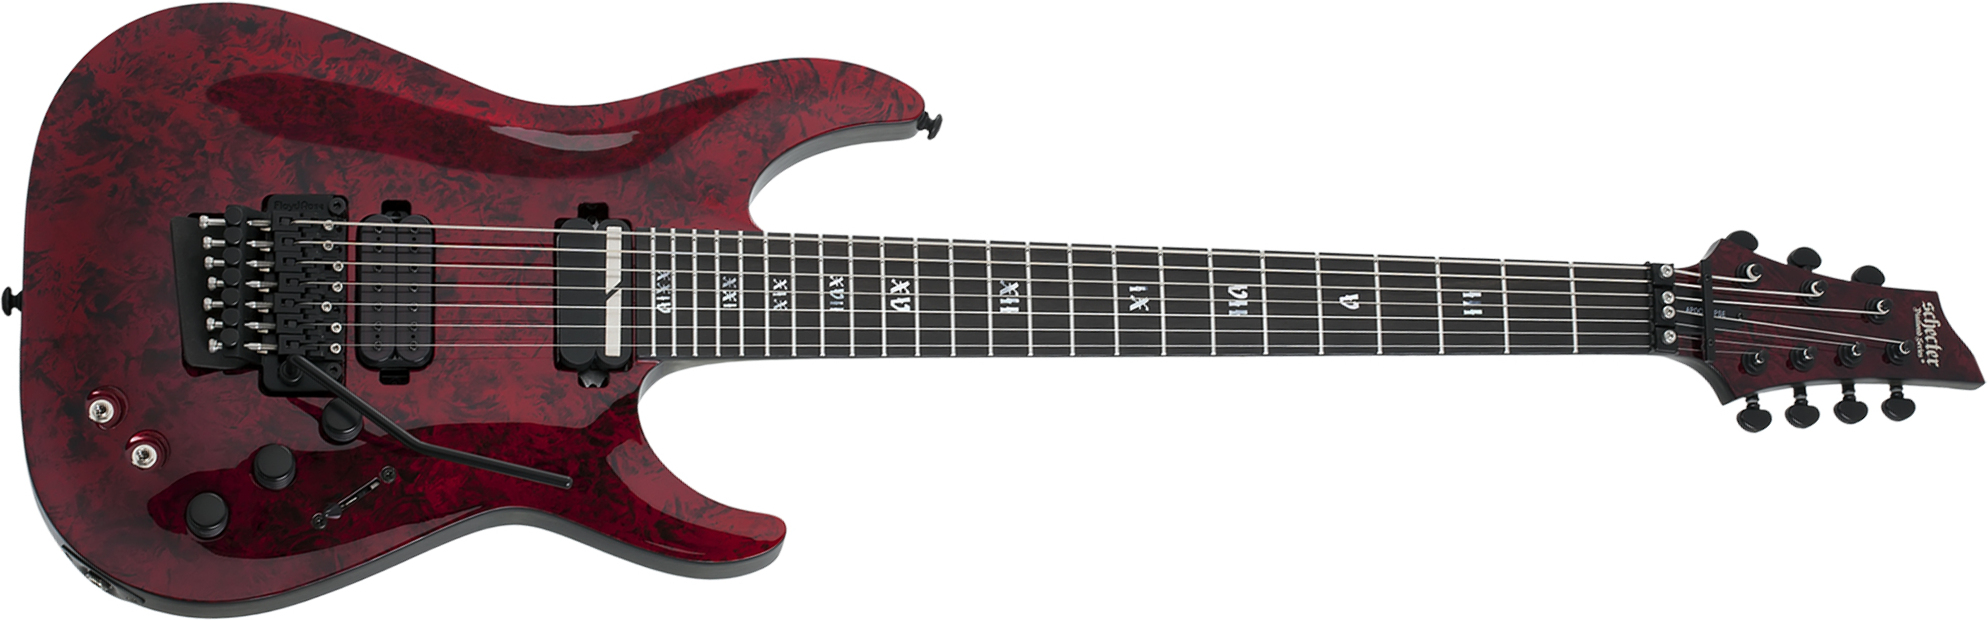 Schecter C-7 Fr S Apocalypse 7c 2h Sustainiac Eb - Red Reign - 7 string electric guitar - Main picture